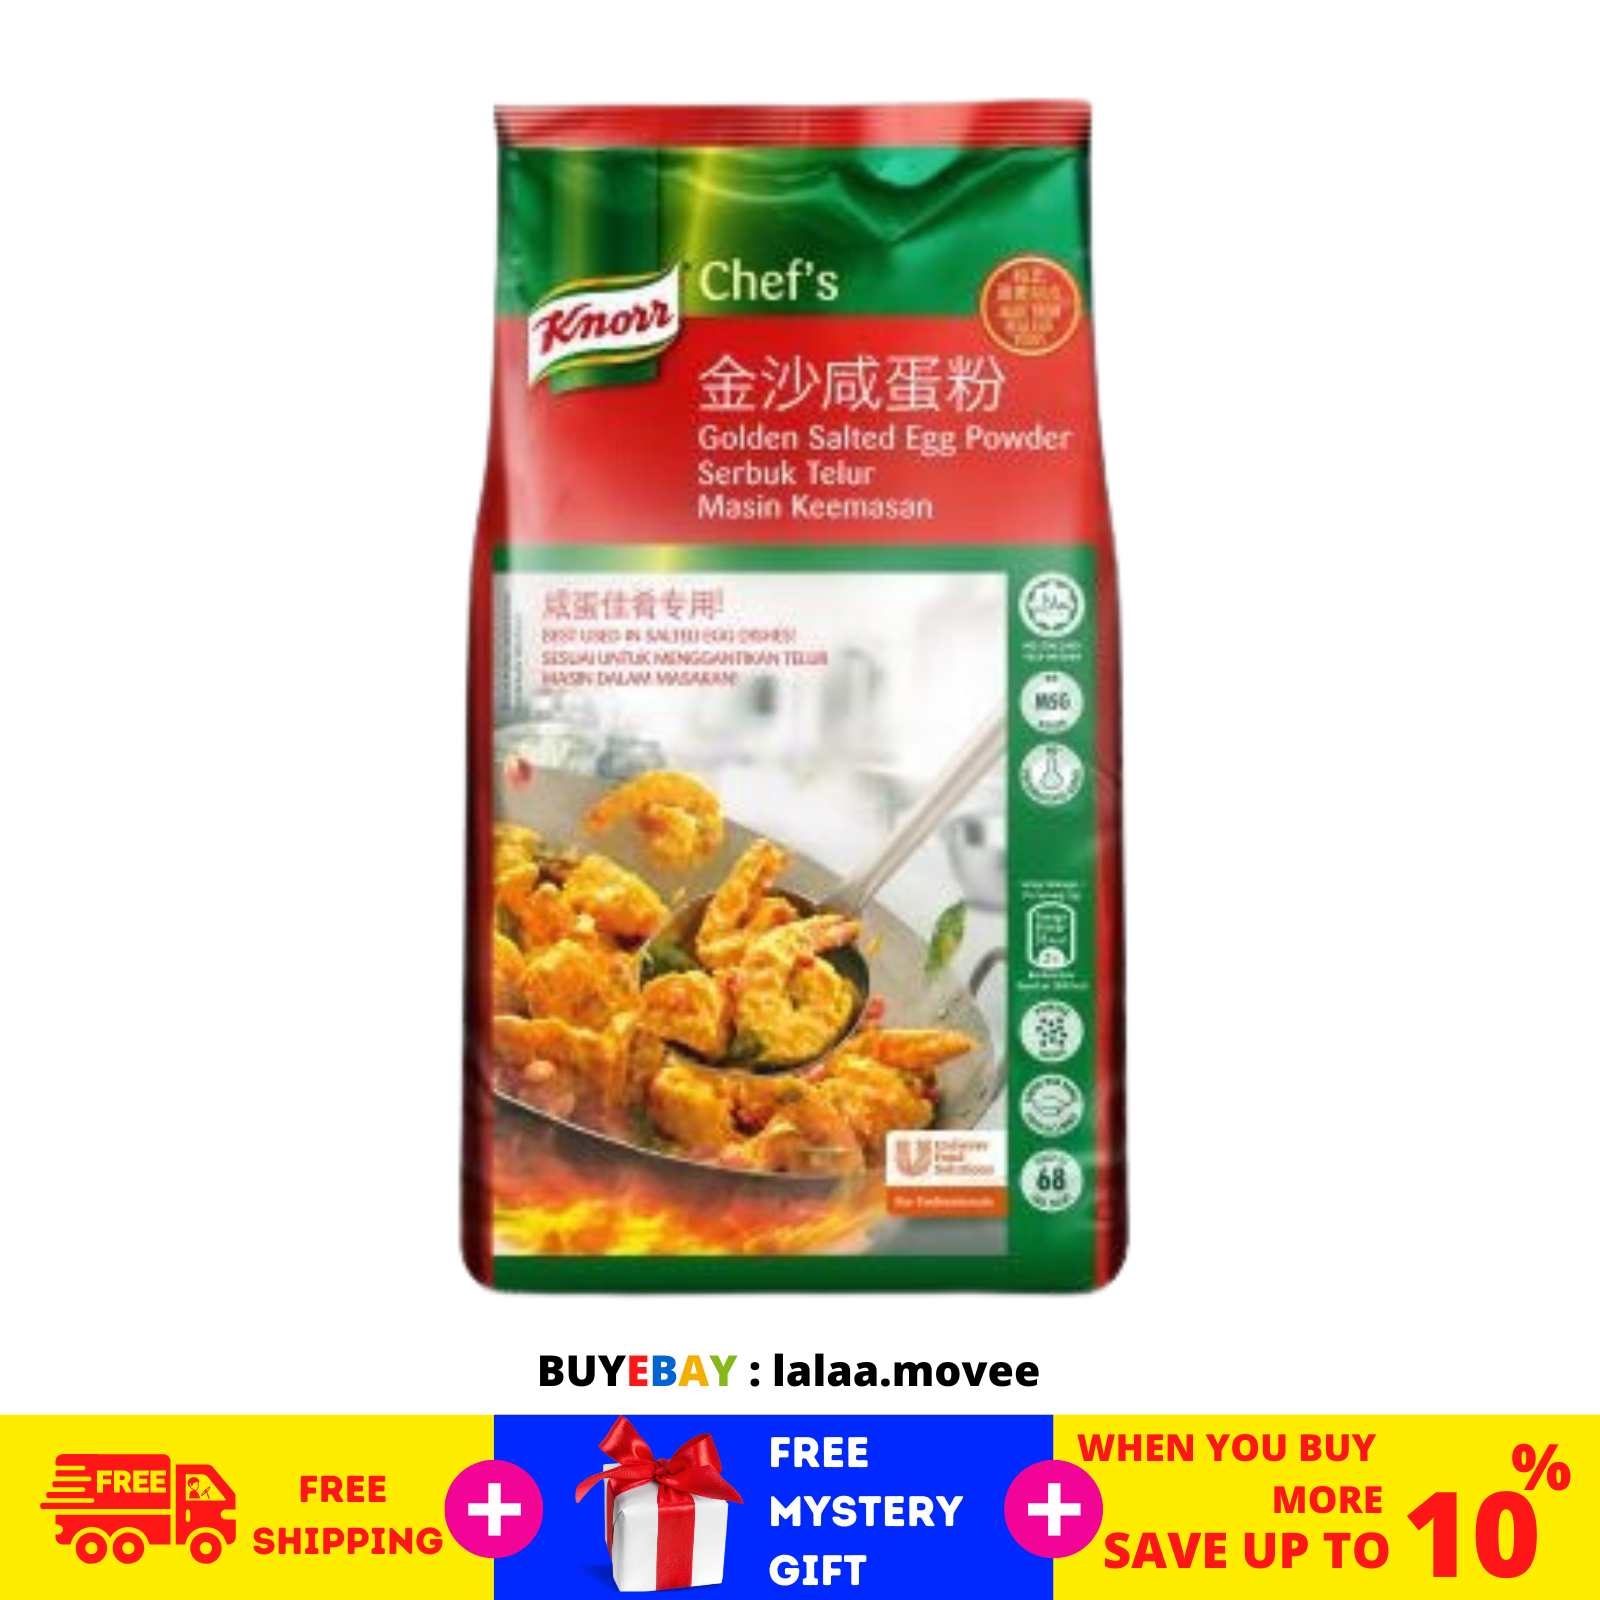 800g Knorr Golden Salted Egg Powder,very Nice Taste, Must Try It's + FREE GIFT - $56.23